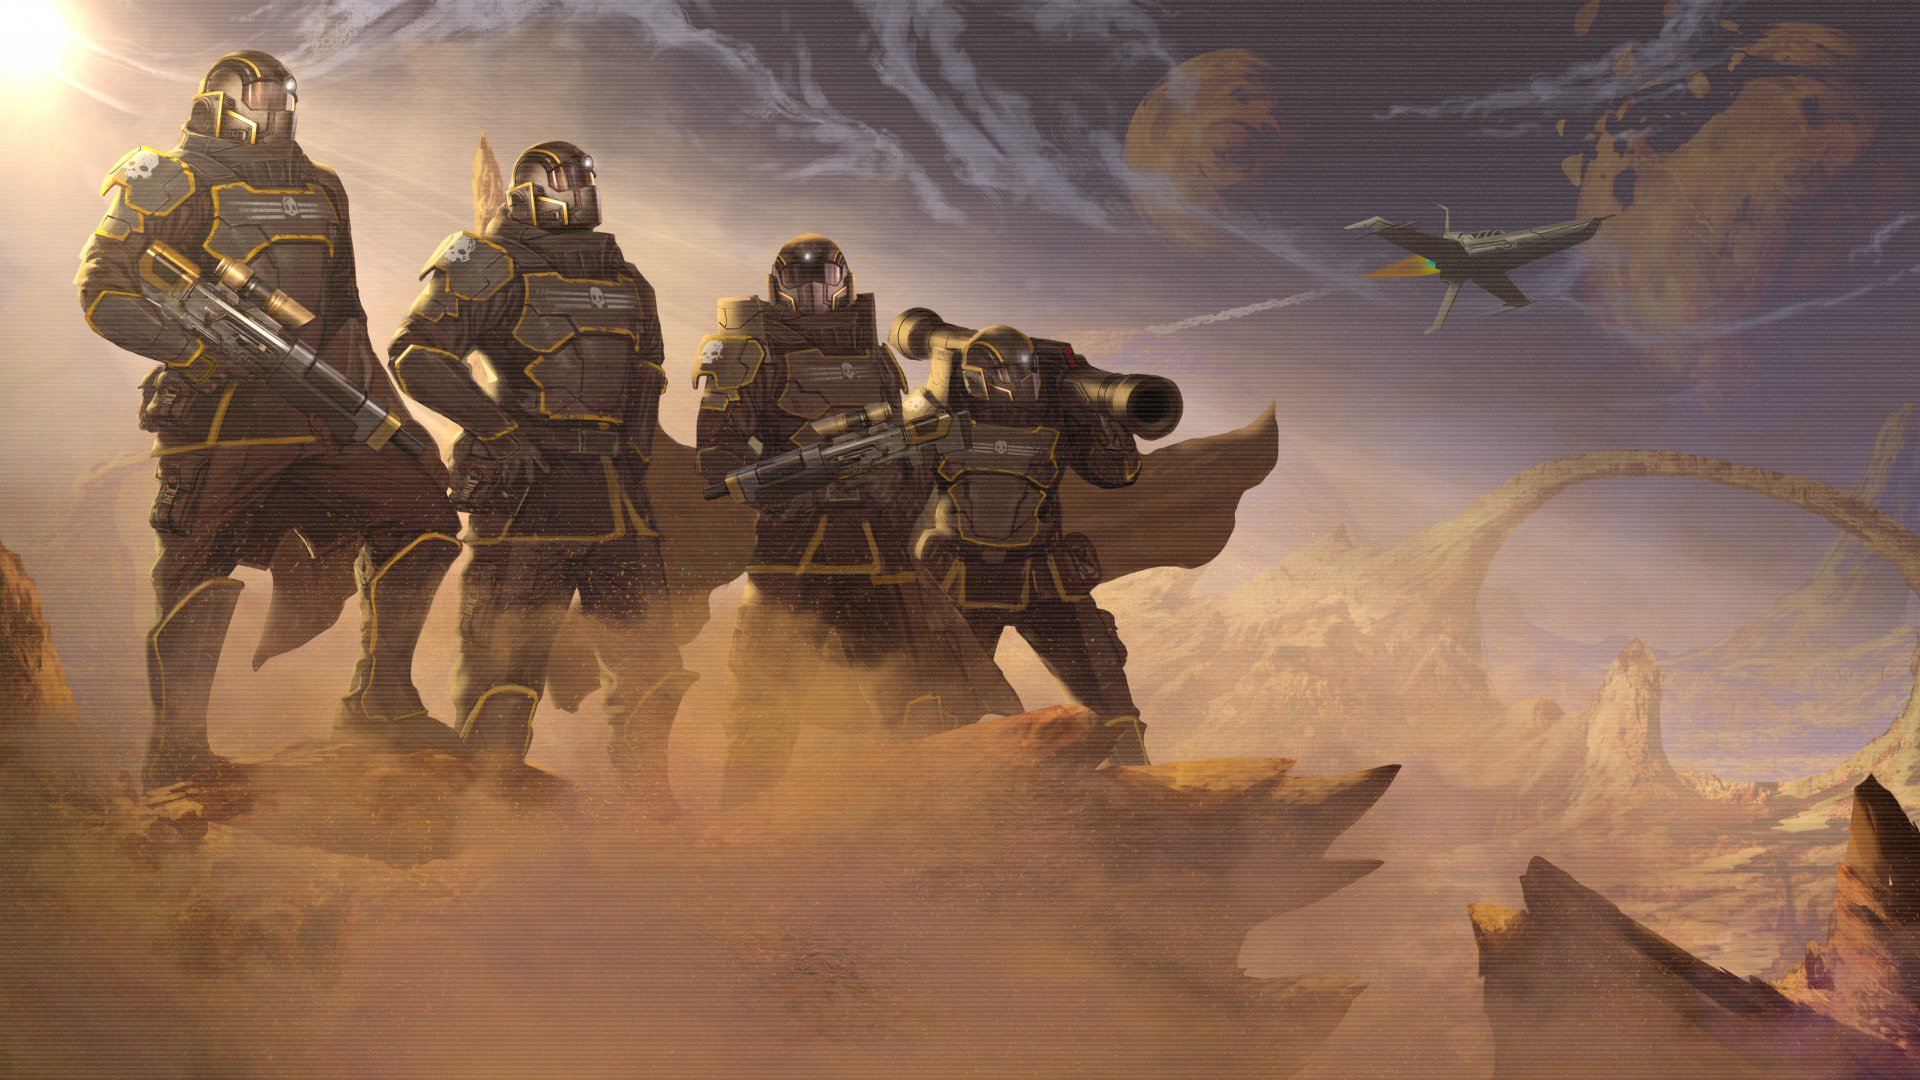 Helldivers HD Wallpaper and Background